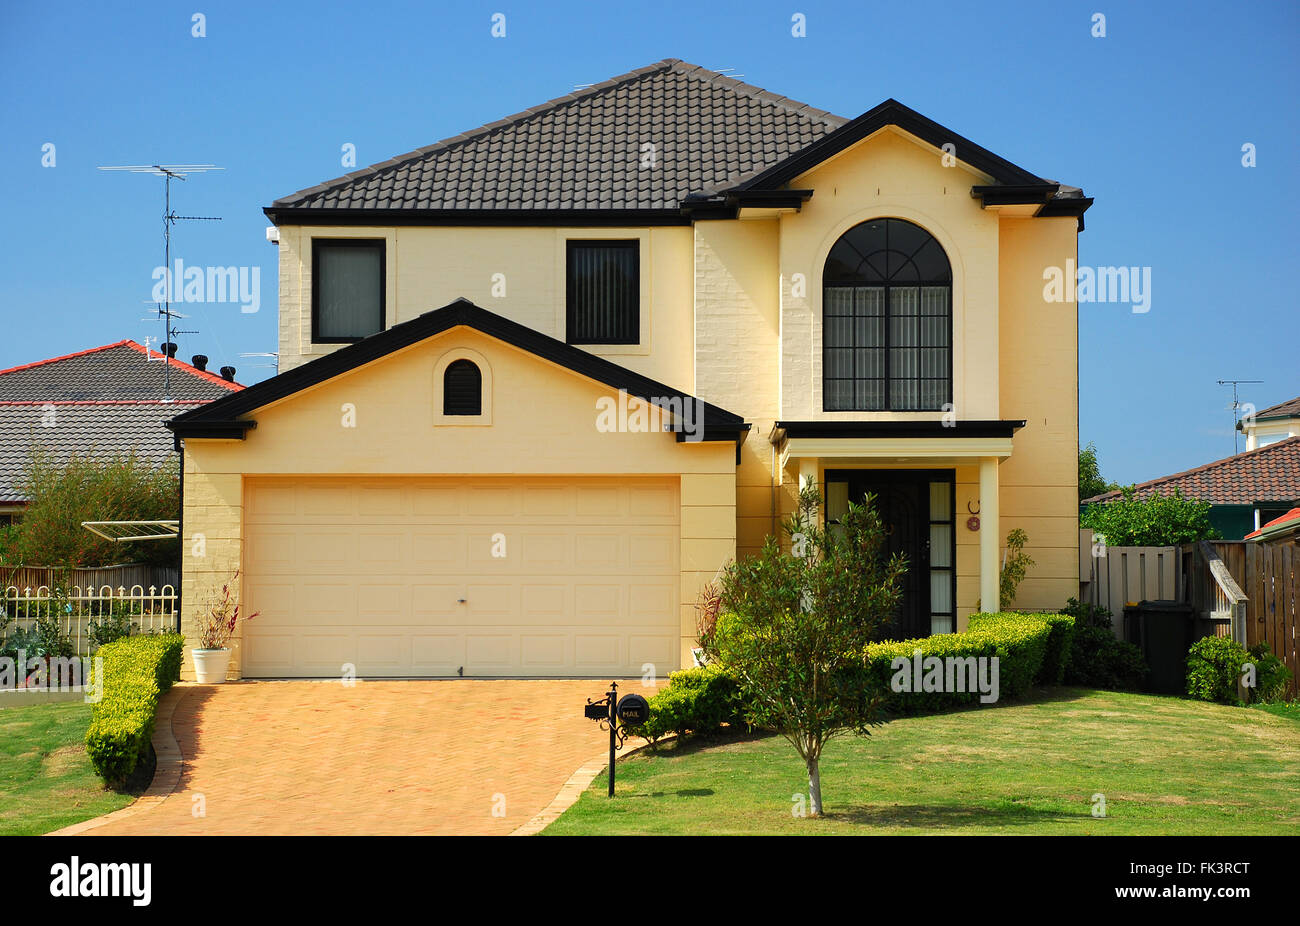 An image of a house in the suburbs of Sydney Australia. Stock Photo